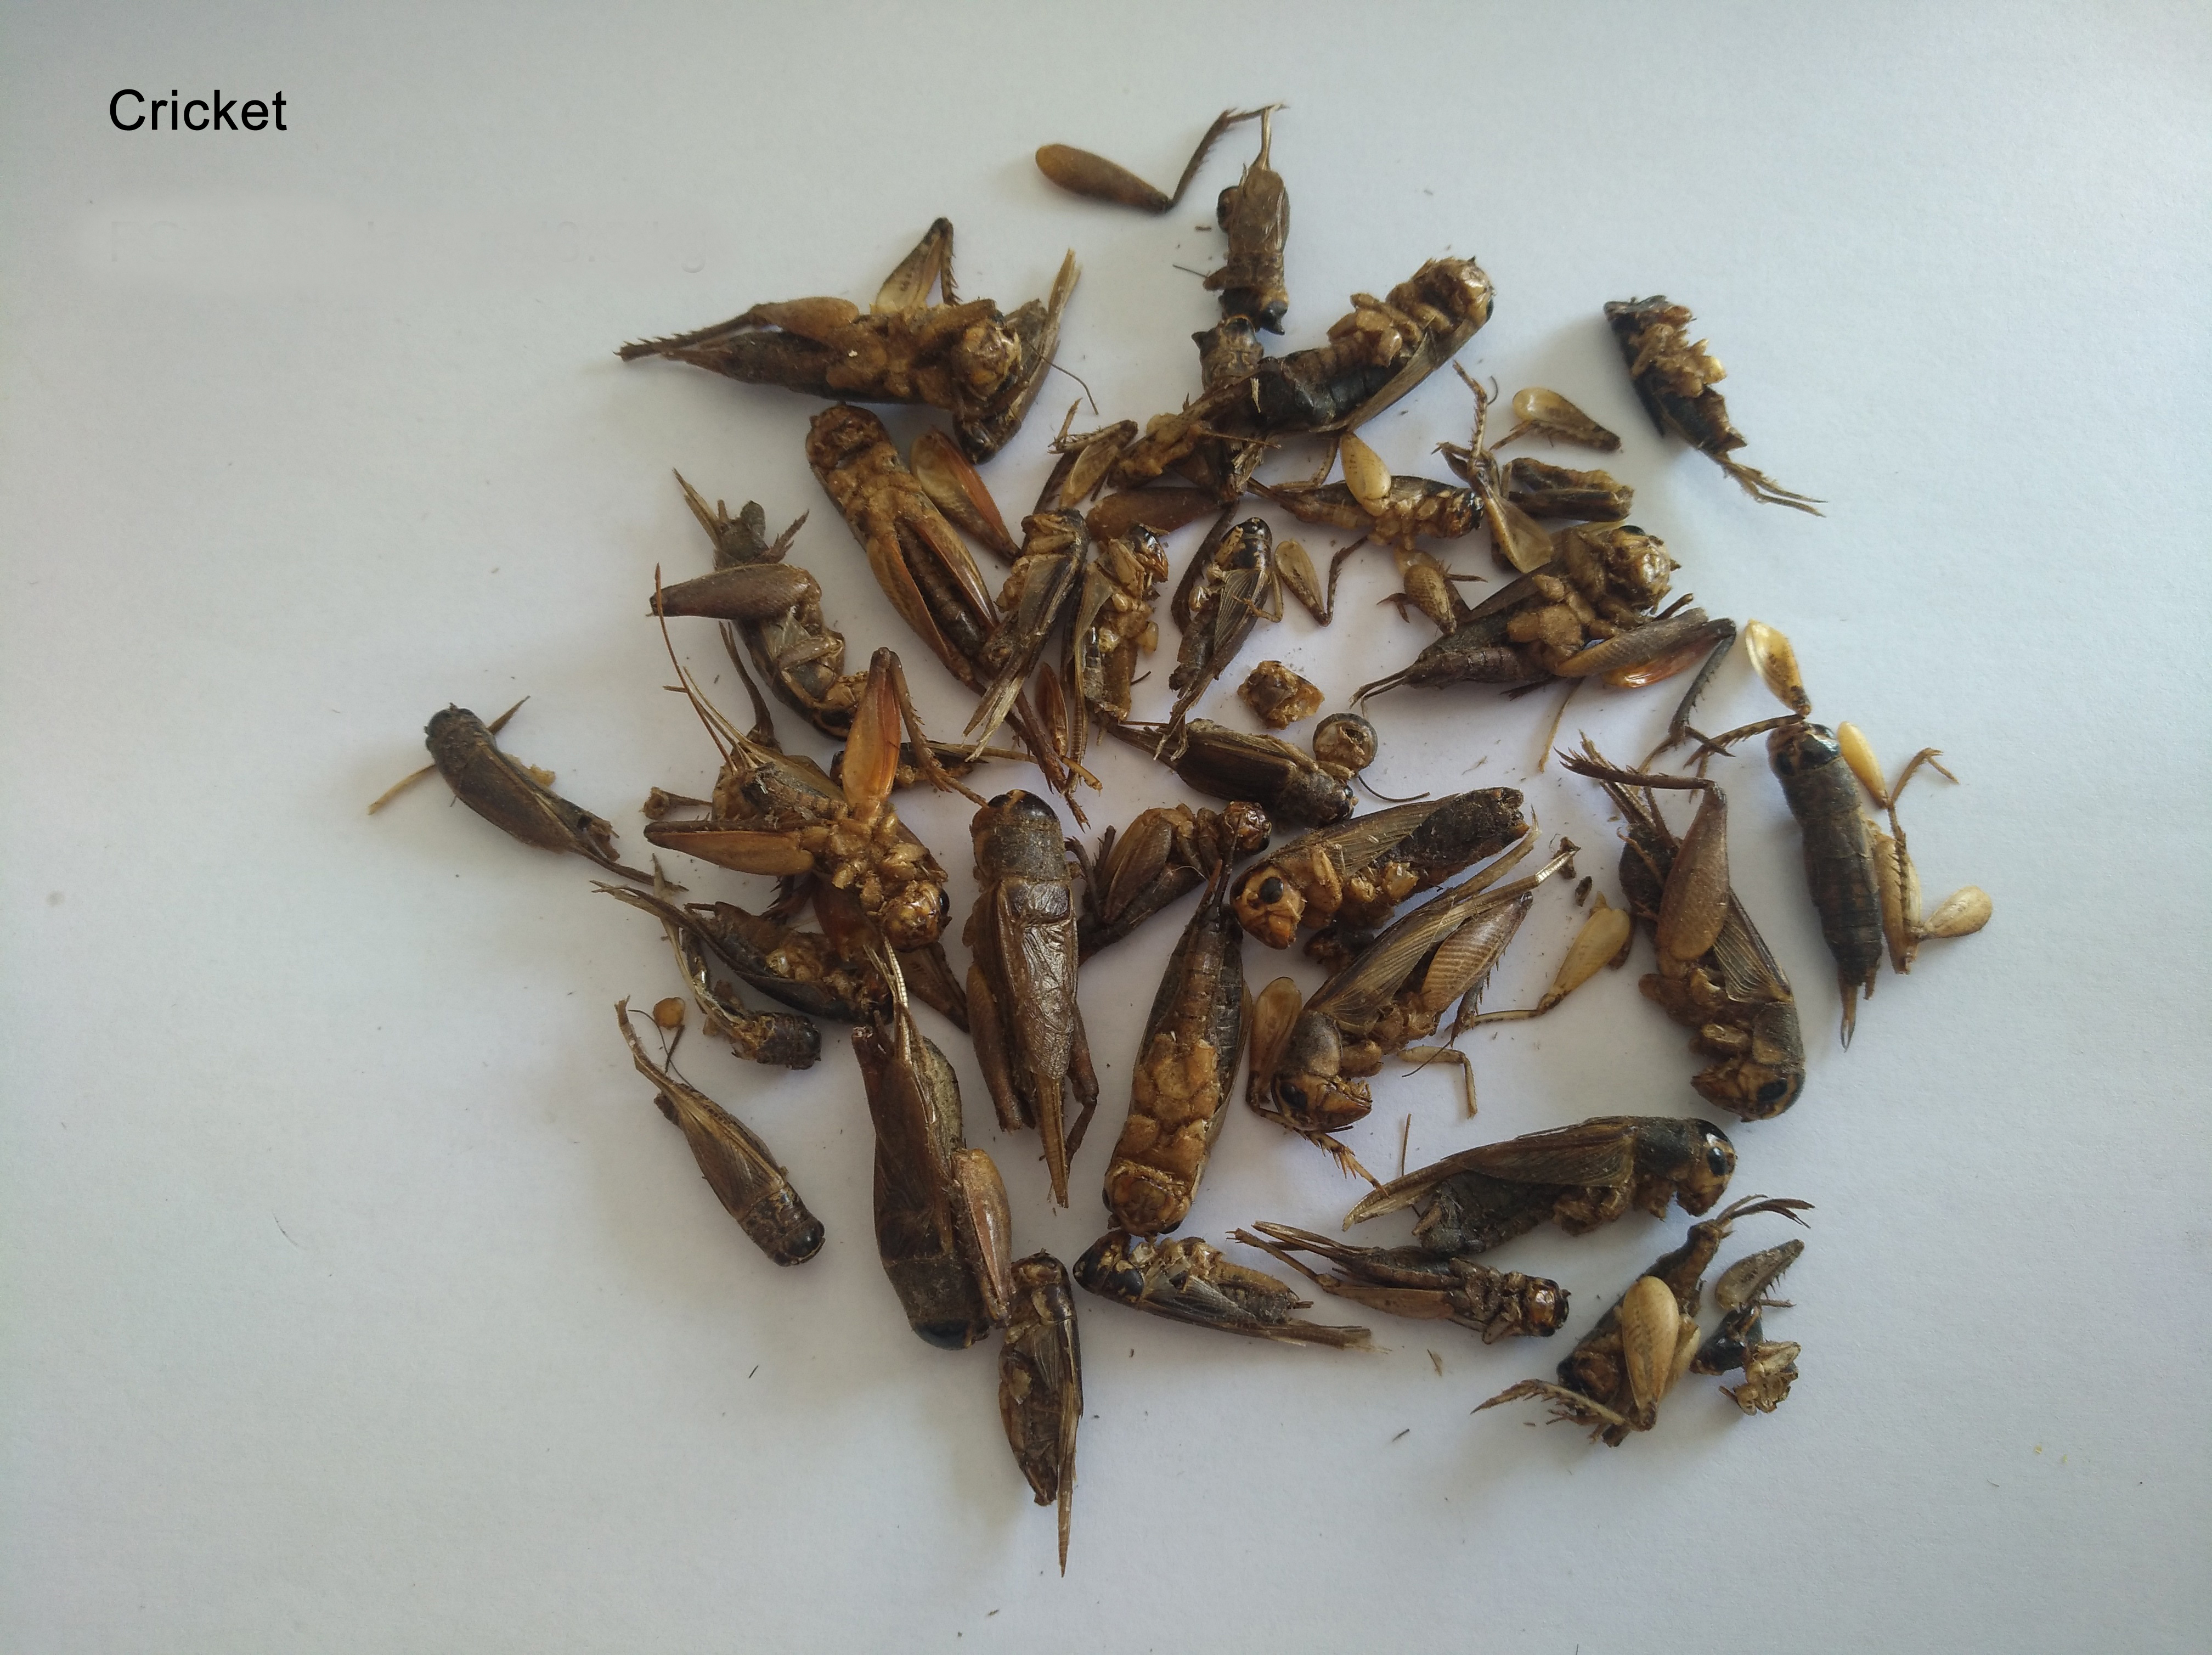 Dried crickets